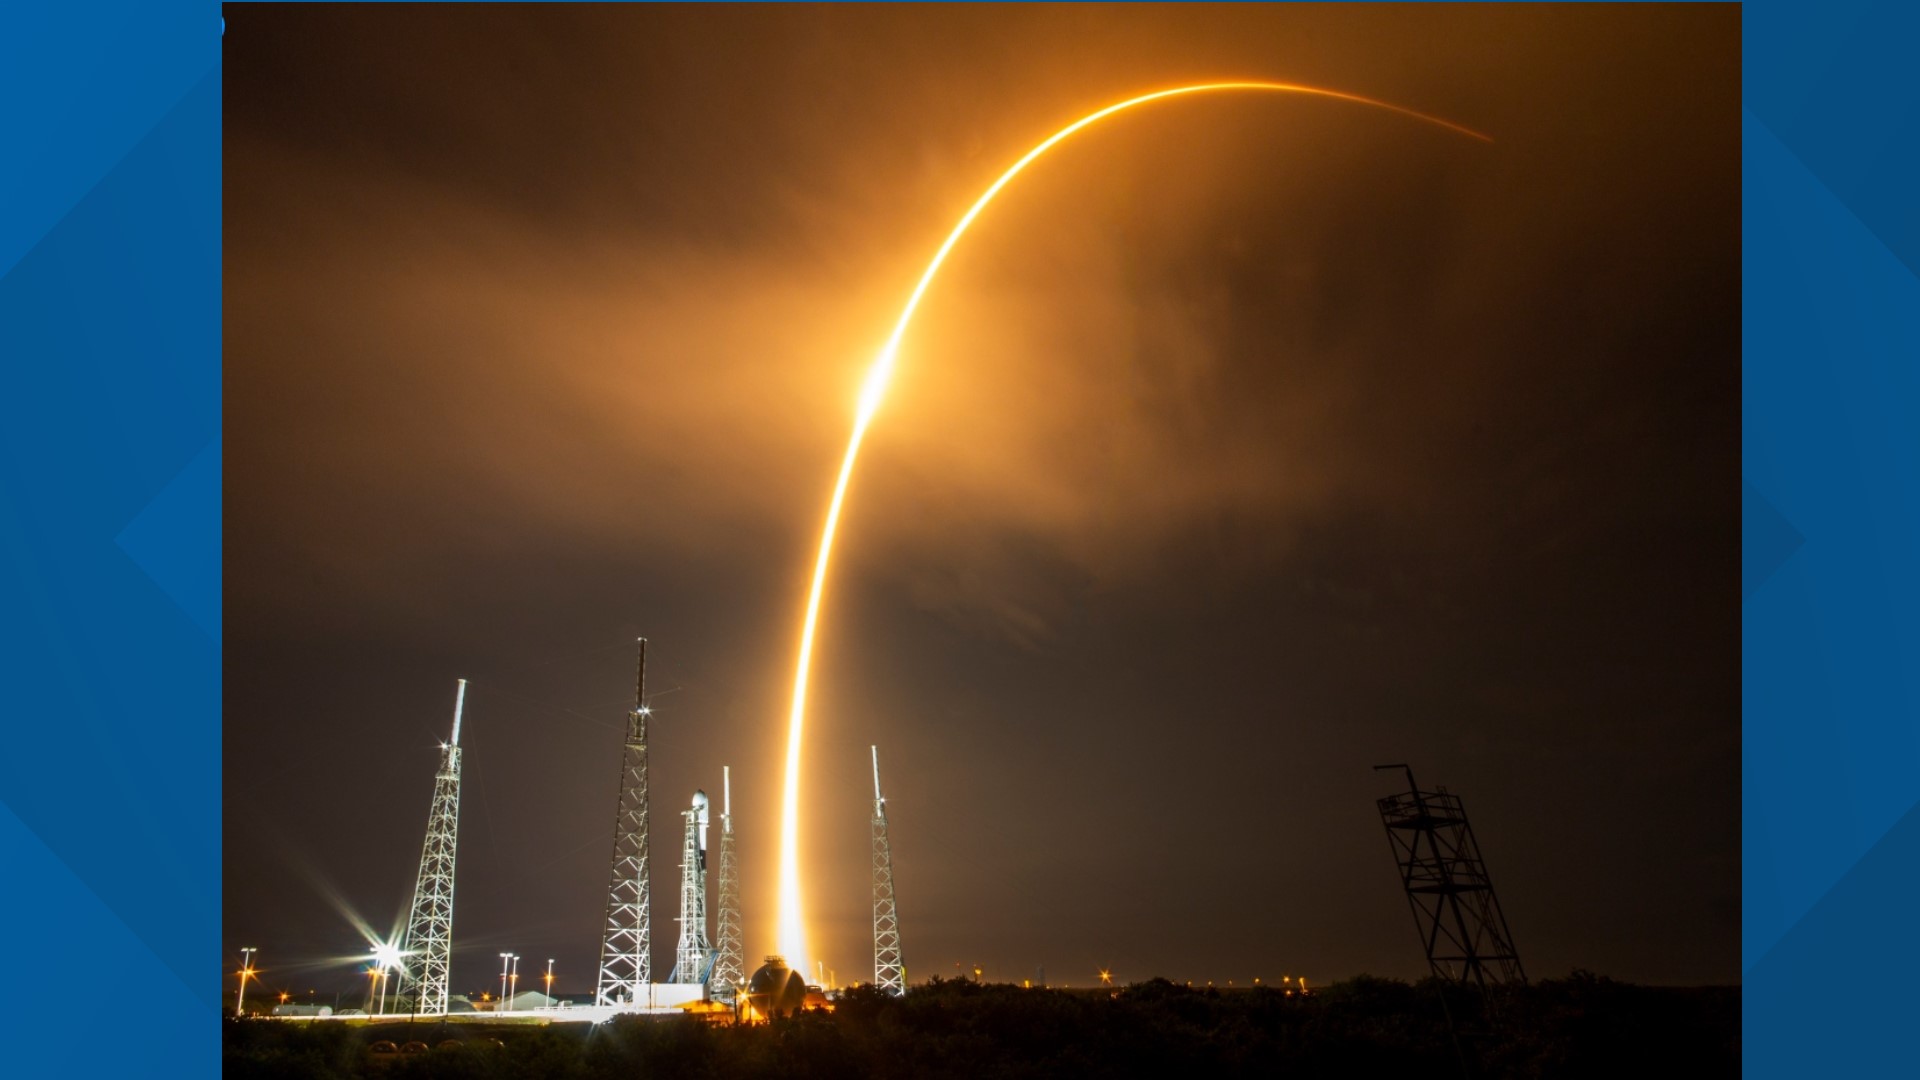 The satellite was launched on the Falcon 9 Rocket alongside SpaceX satellites.